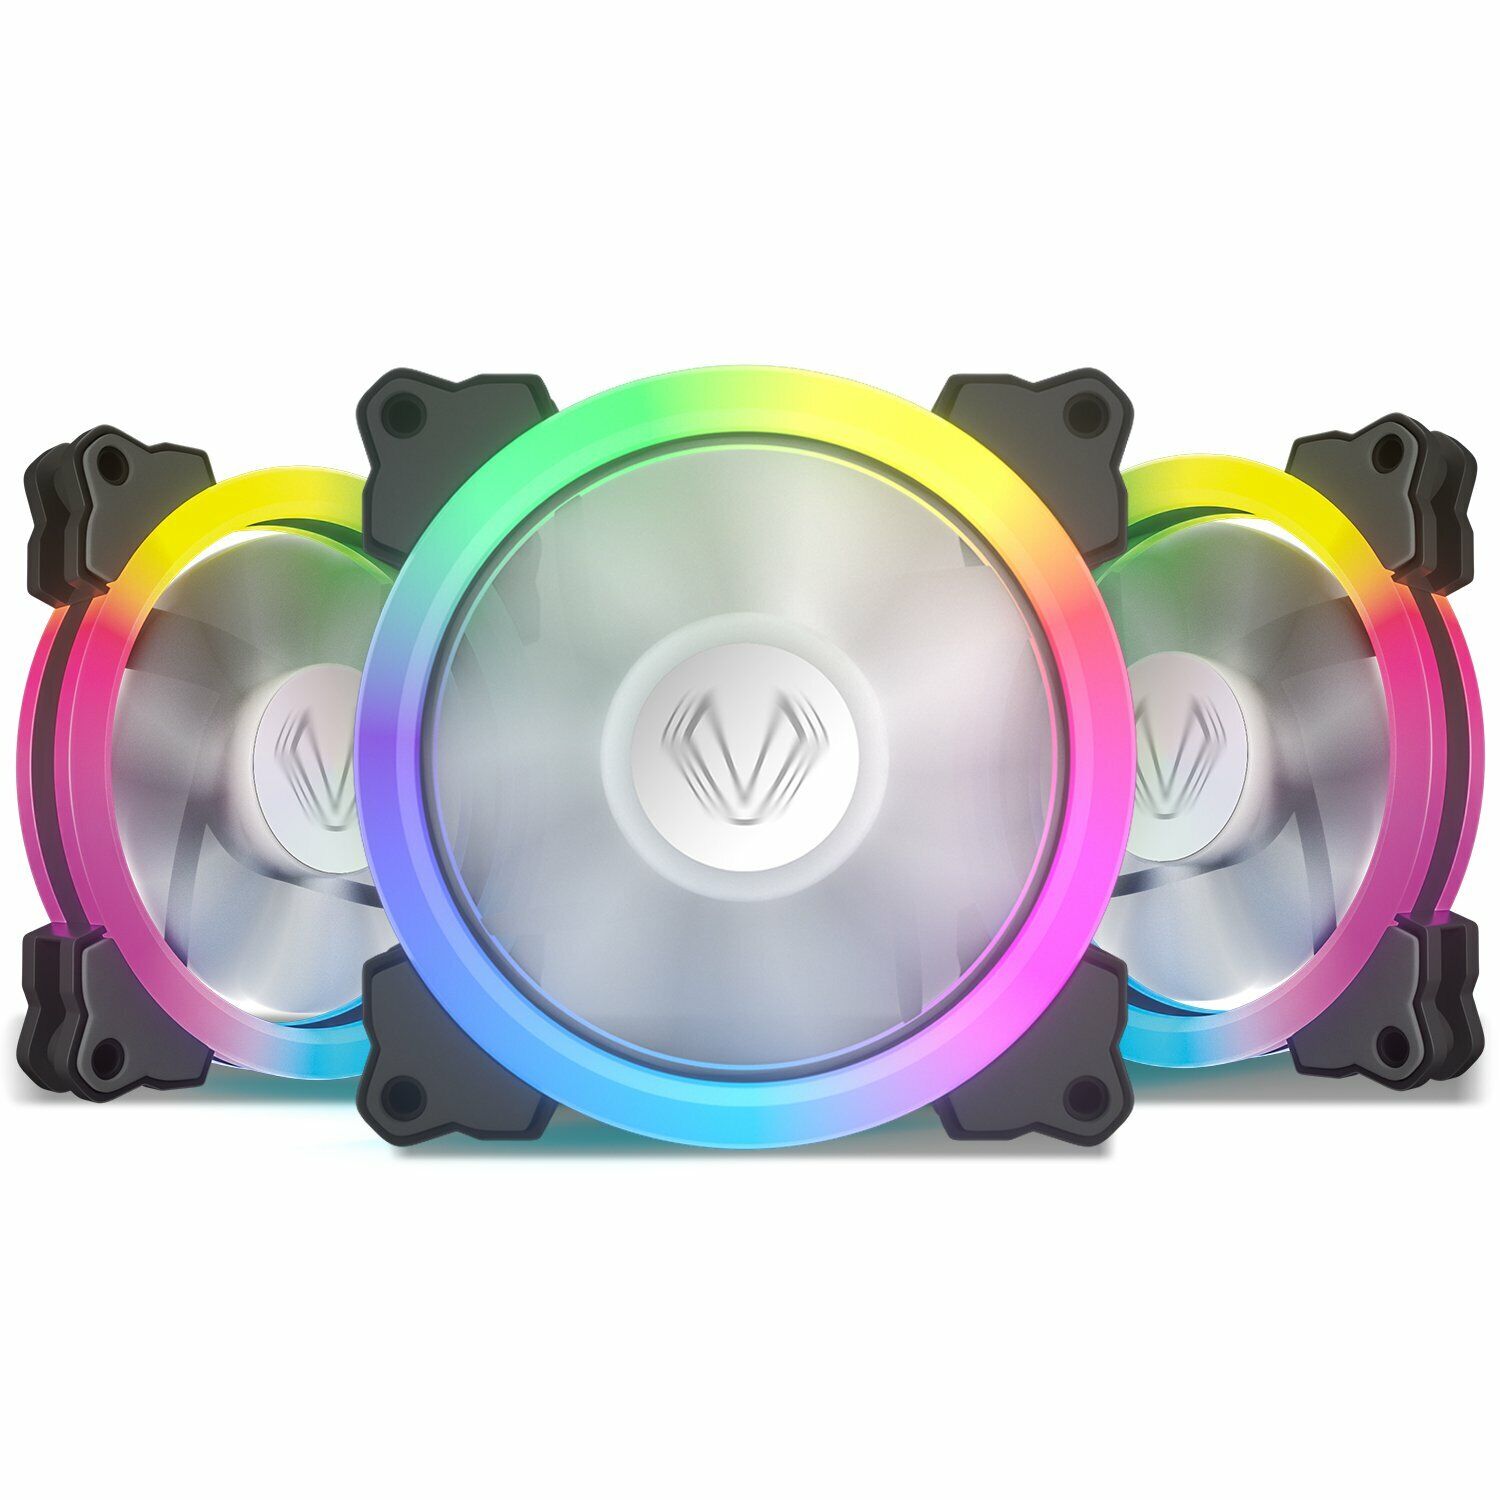 3 Pack Vetroo 120mm RGB Case Fan 5V 3 Pin Addressable Motherboard SYNC with